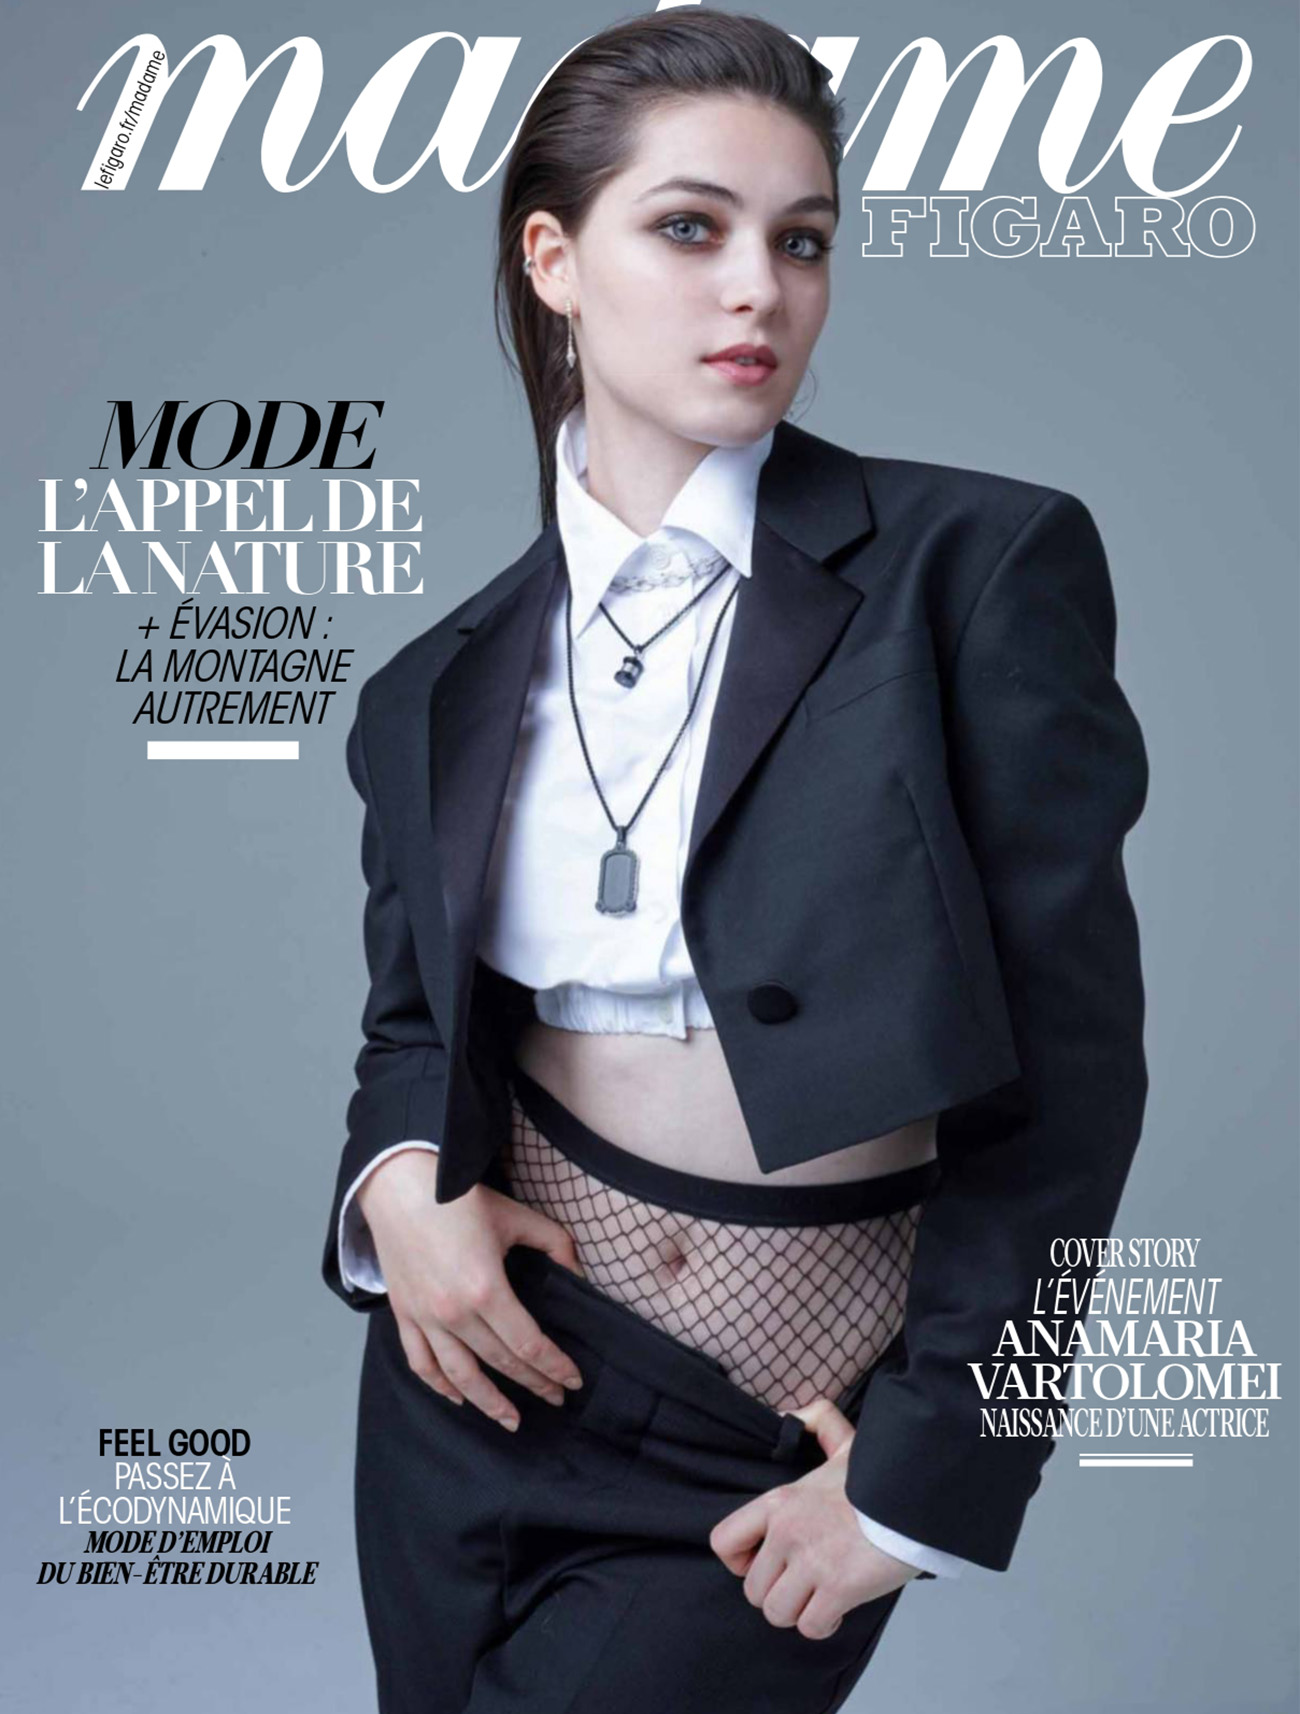 Anamaria Vartolomei covers Madame Figaro October 29th, 2021 by Luc Braquet